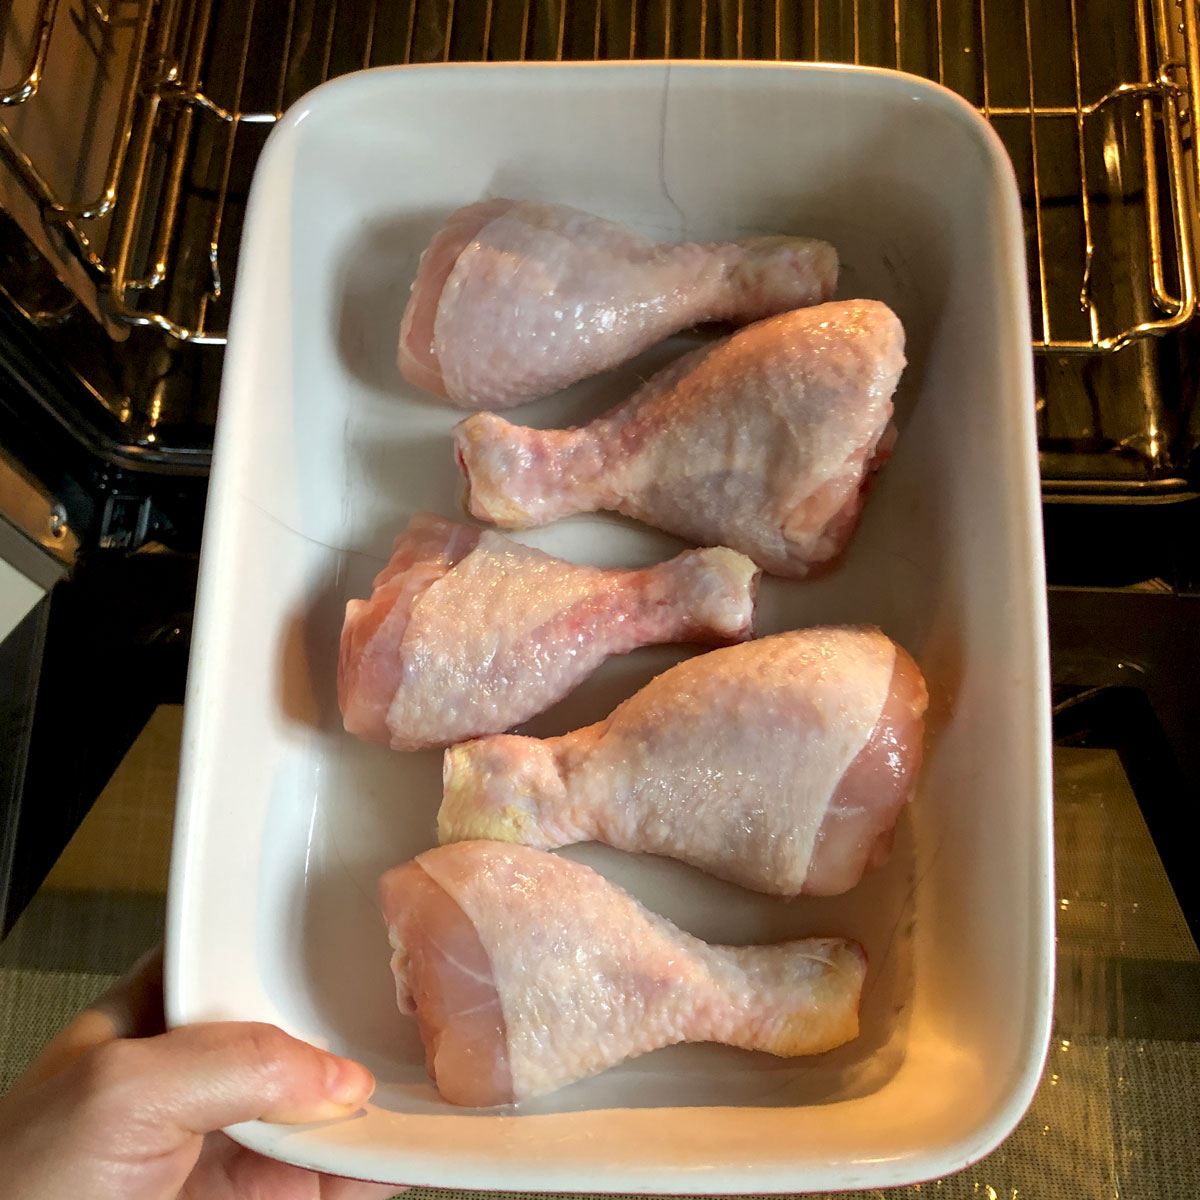 Picture of a recipe step - inserting chicken drumsticks into the oven.